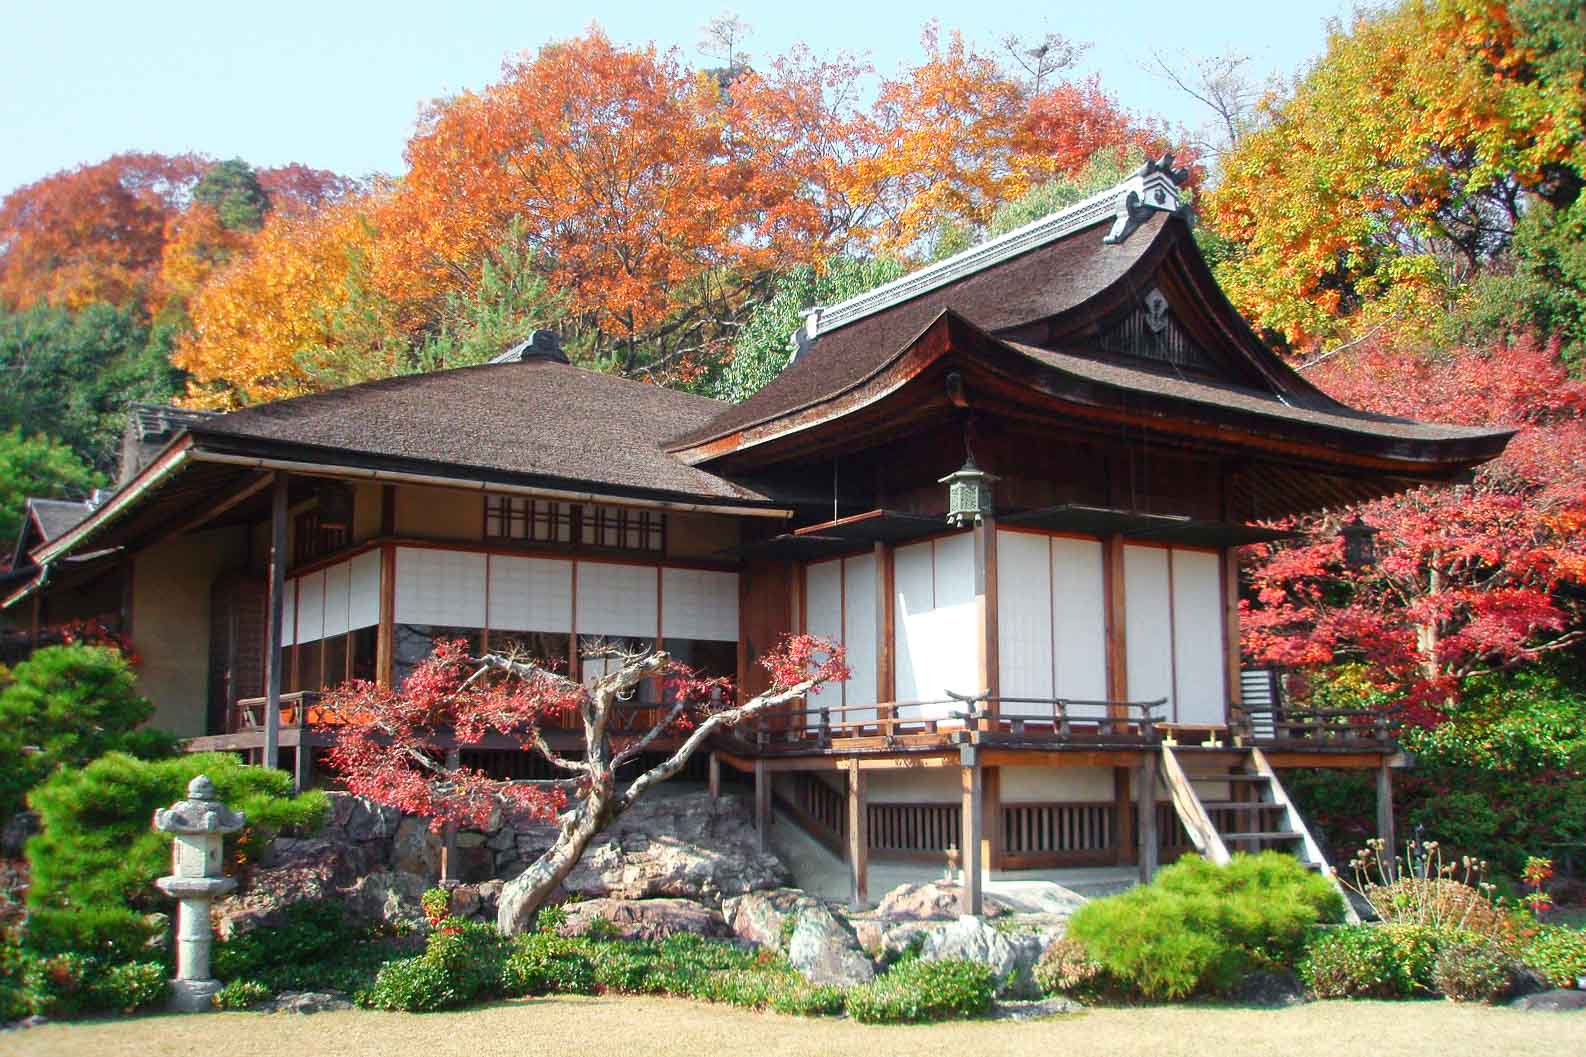 the Villa at Okochi Sanso Garden with vibrant fall foliage in the background.